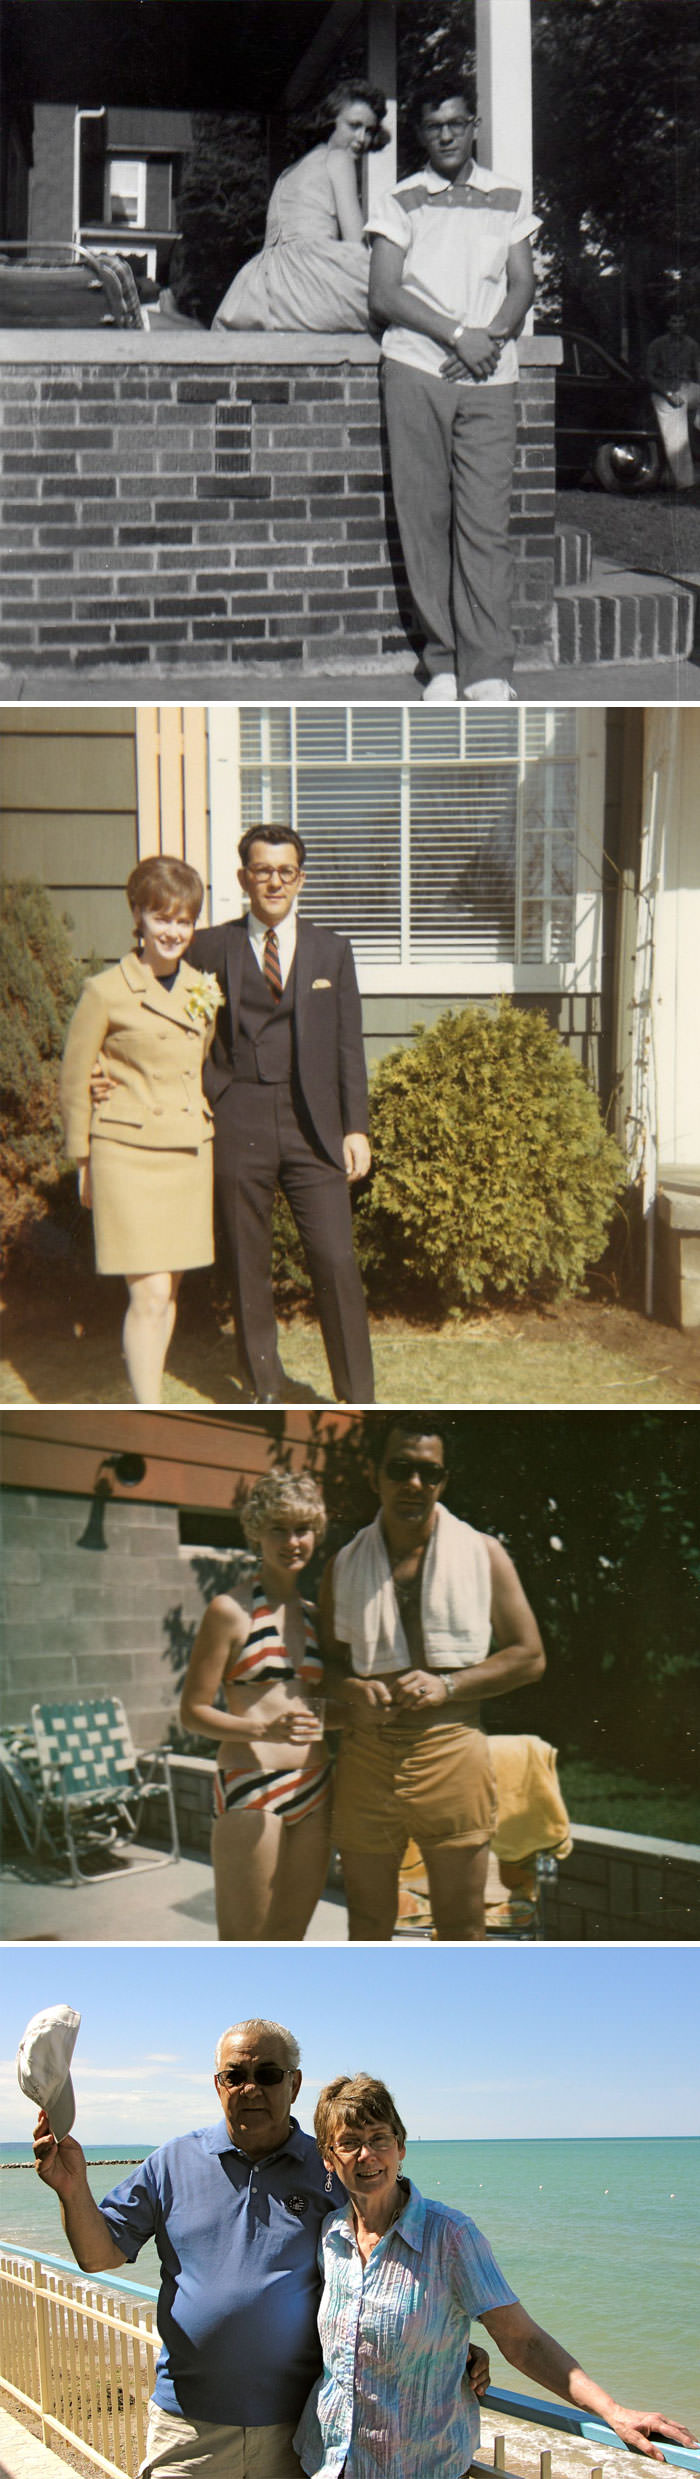 My grandparents in the 50s, 60s, 70s, and today.